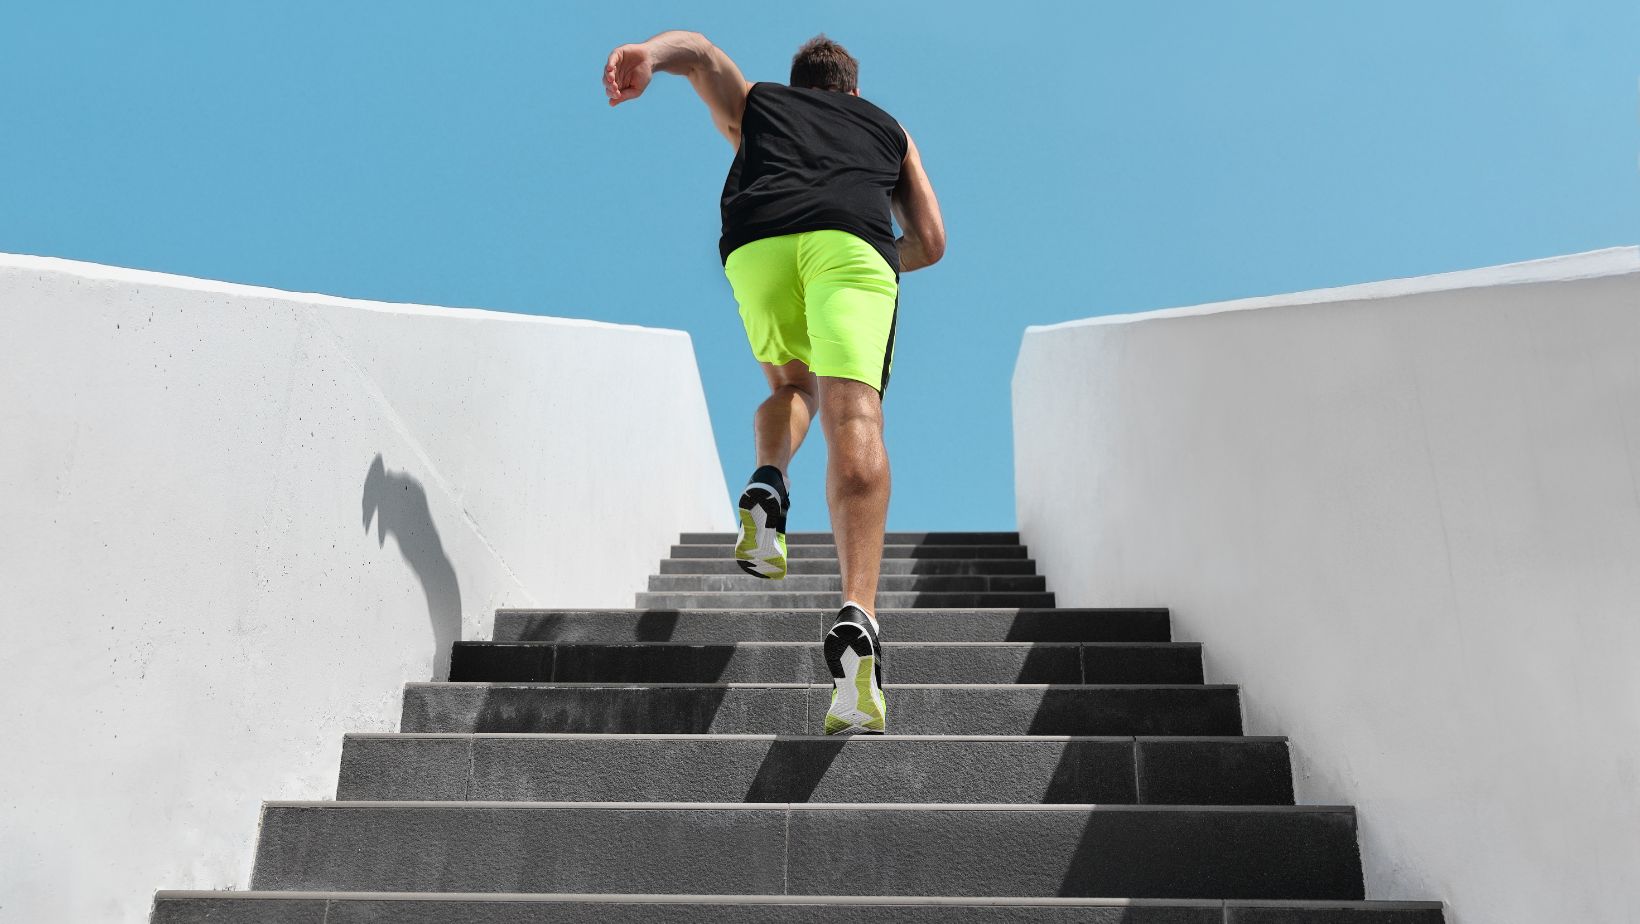 Stairs Exercise Fitess Man Running Fast up the Staircase for Hiit Cardio Workout Run at Outdoor Gym. Sport Active Athlete Lifestyle Training Legs Muscles